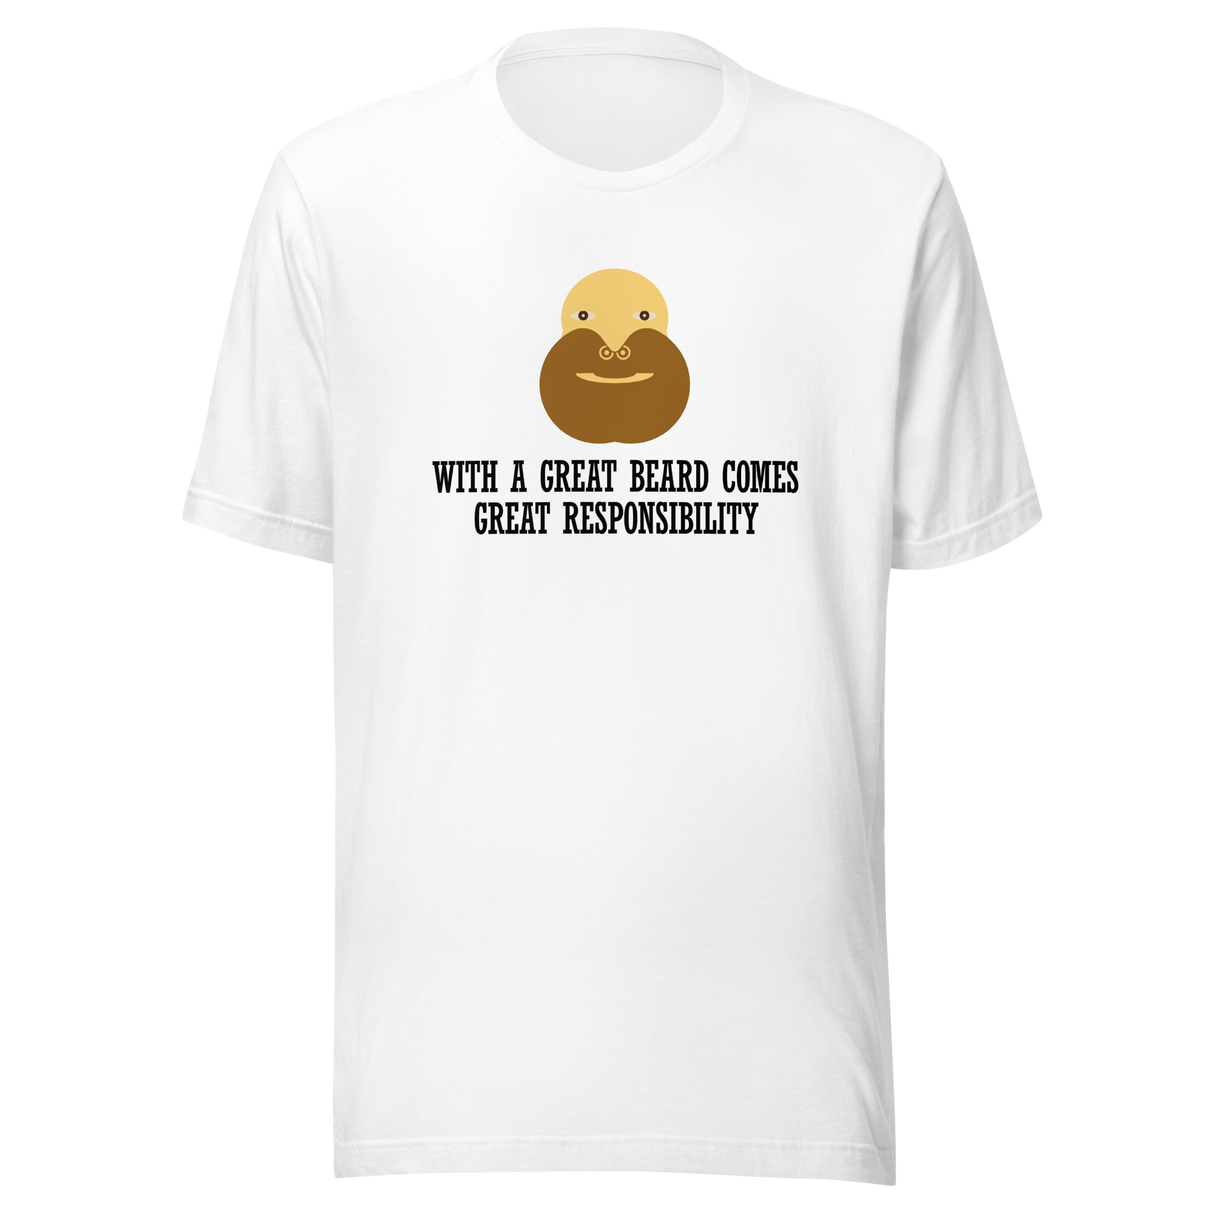 with-a-great-beard-comes-great-responsibility-beard-tee-responsibility-t-shirt-great-beard-tee-mens-t-shirt-gift-tee#color_white